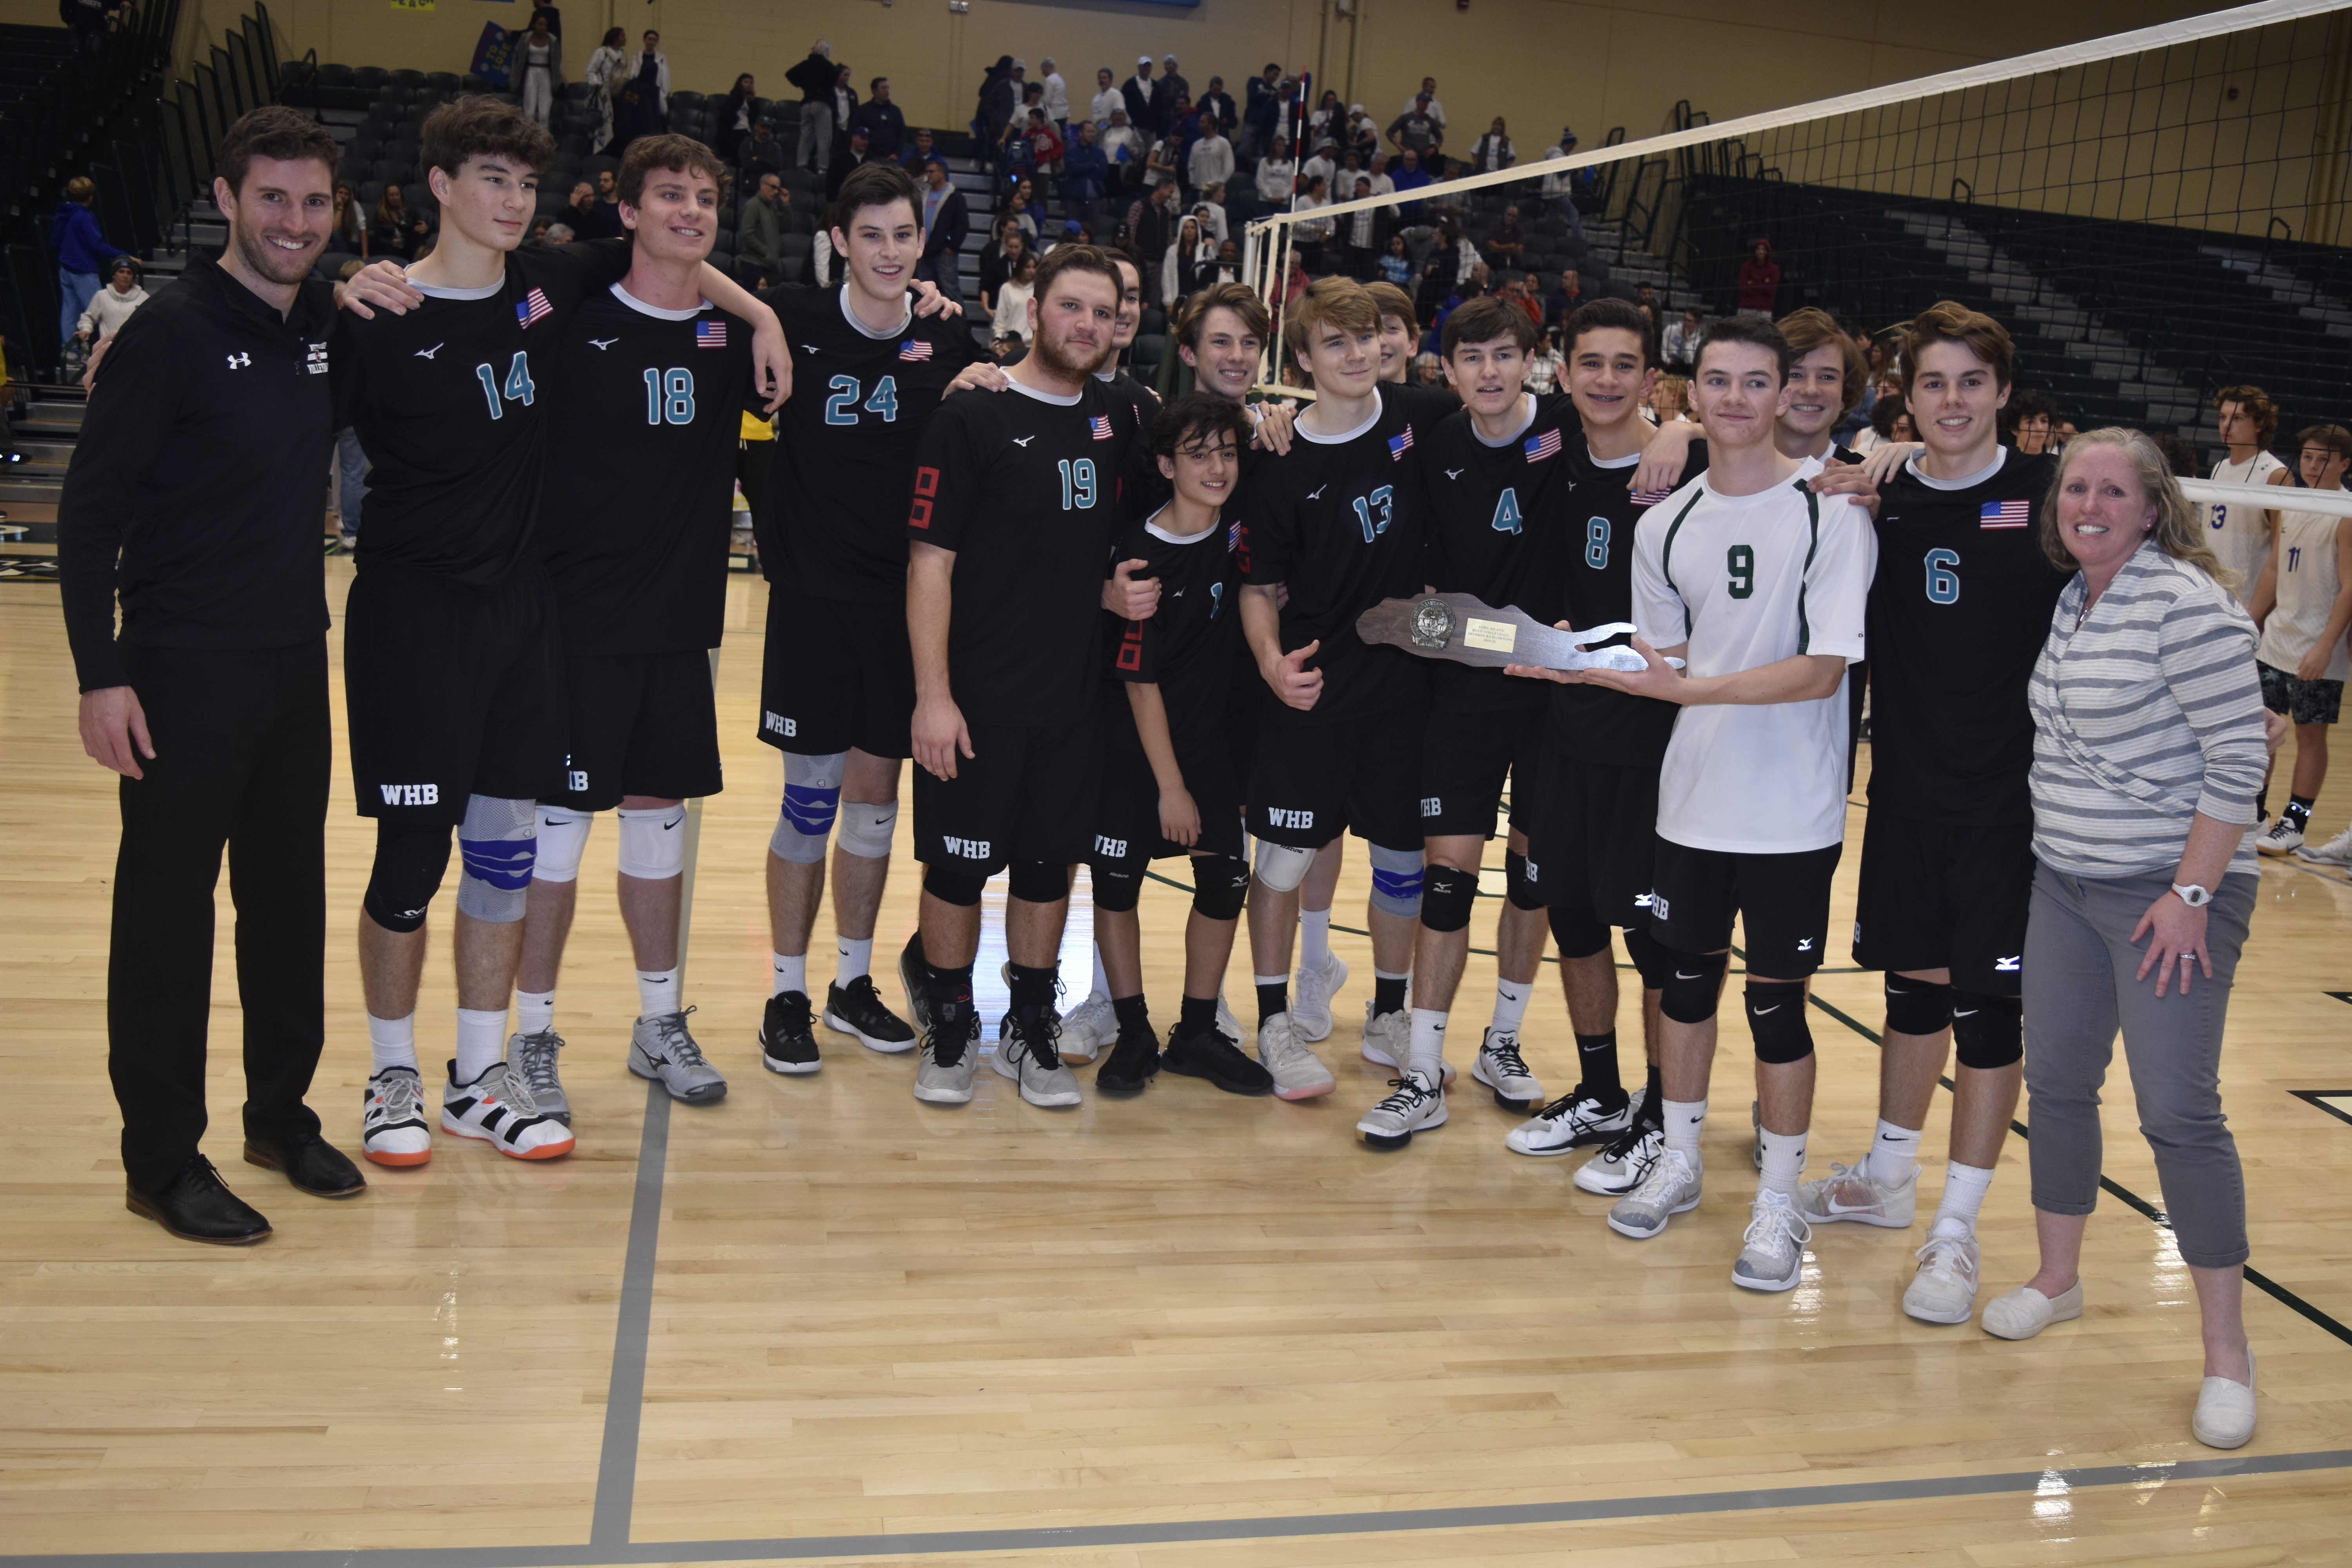 The Westhampton Beach boys volleyball team won its first ever Long Island Championship on Tuesday night after defeating Long Beach, 3-2.